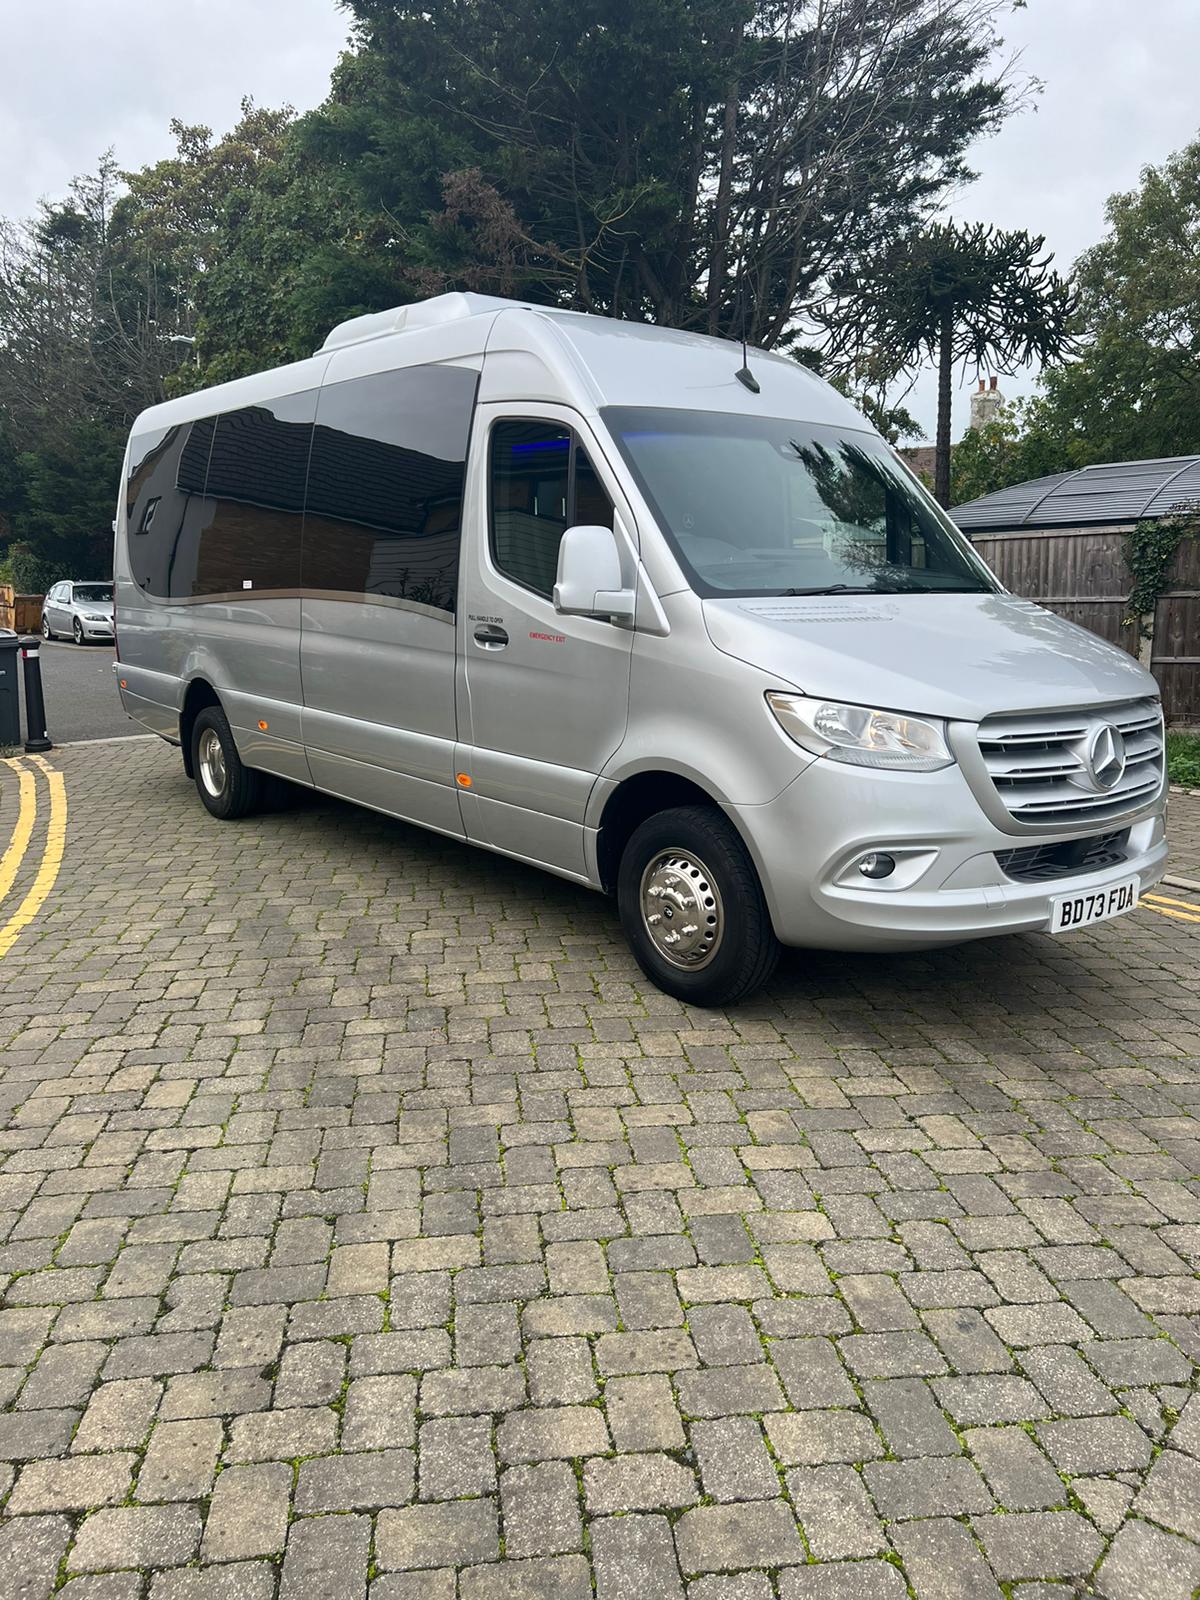 Why Choose a 16 Seater Minibus for Your Next Group Trip